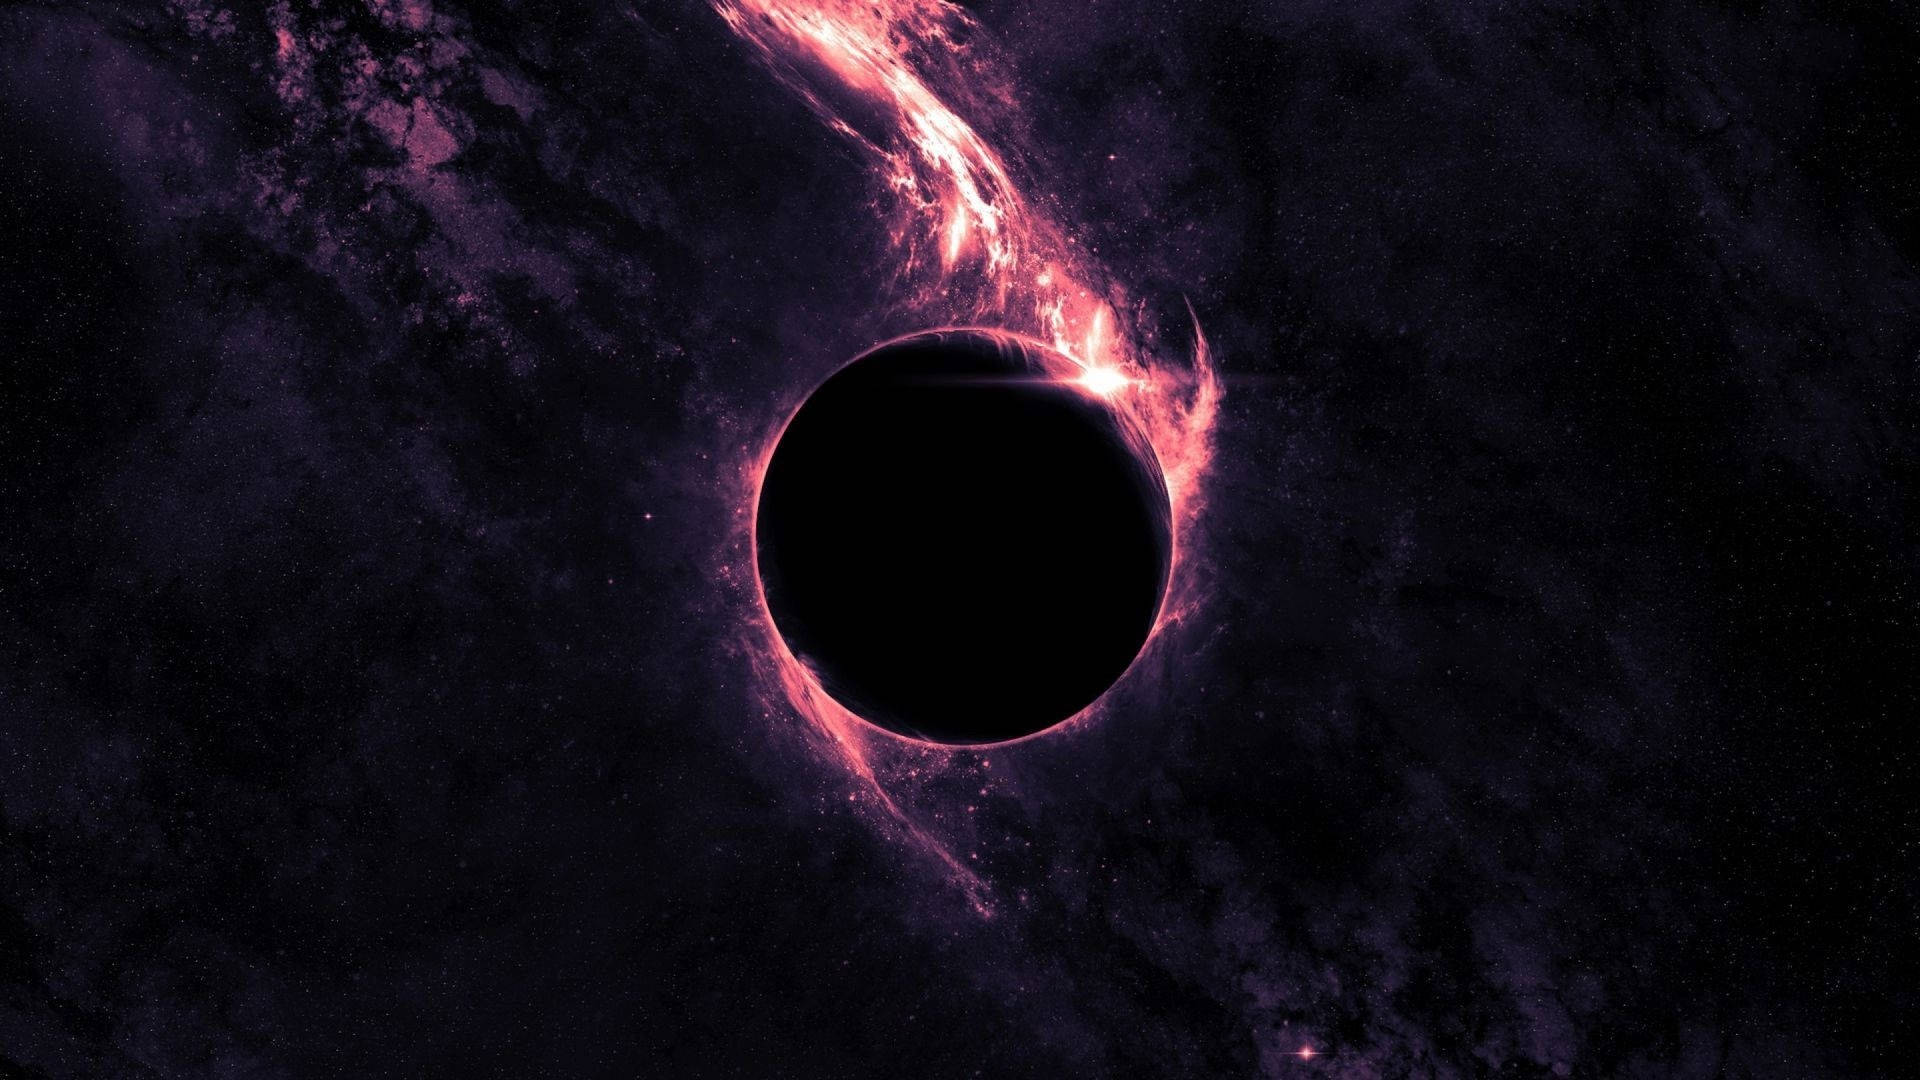 Pink Lights And Black Hole 1920x1080 HD Space Wallpaper